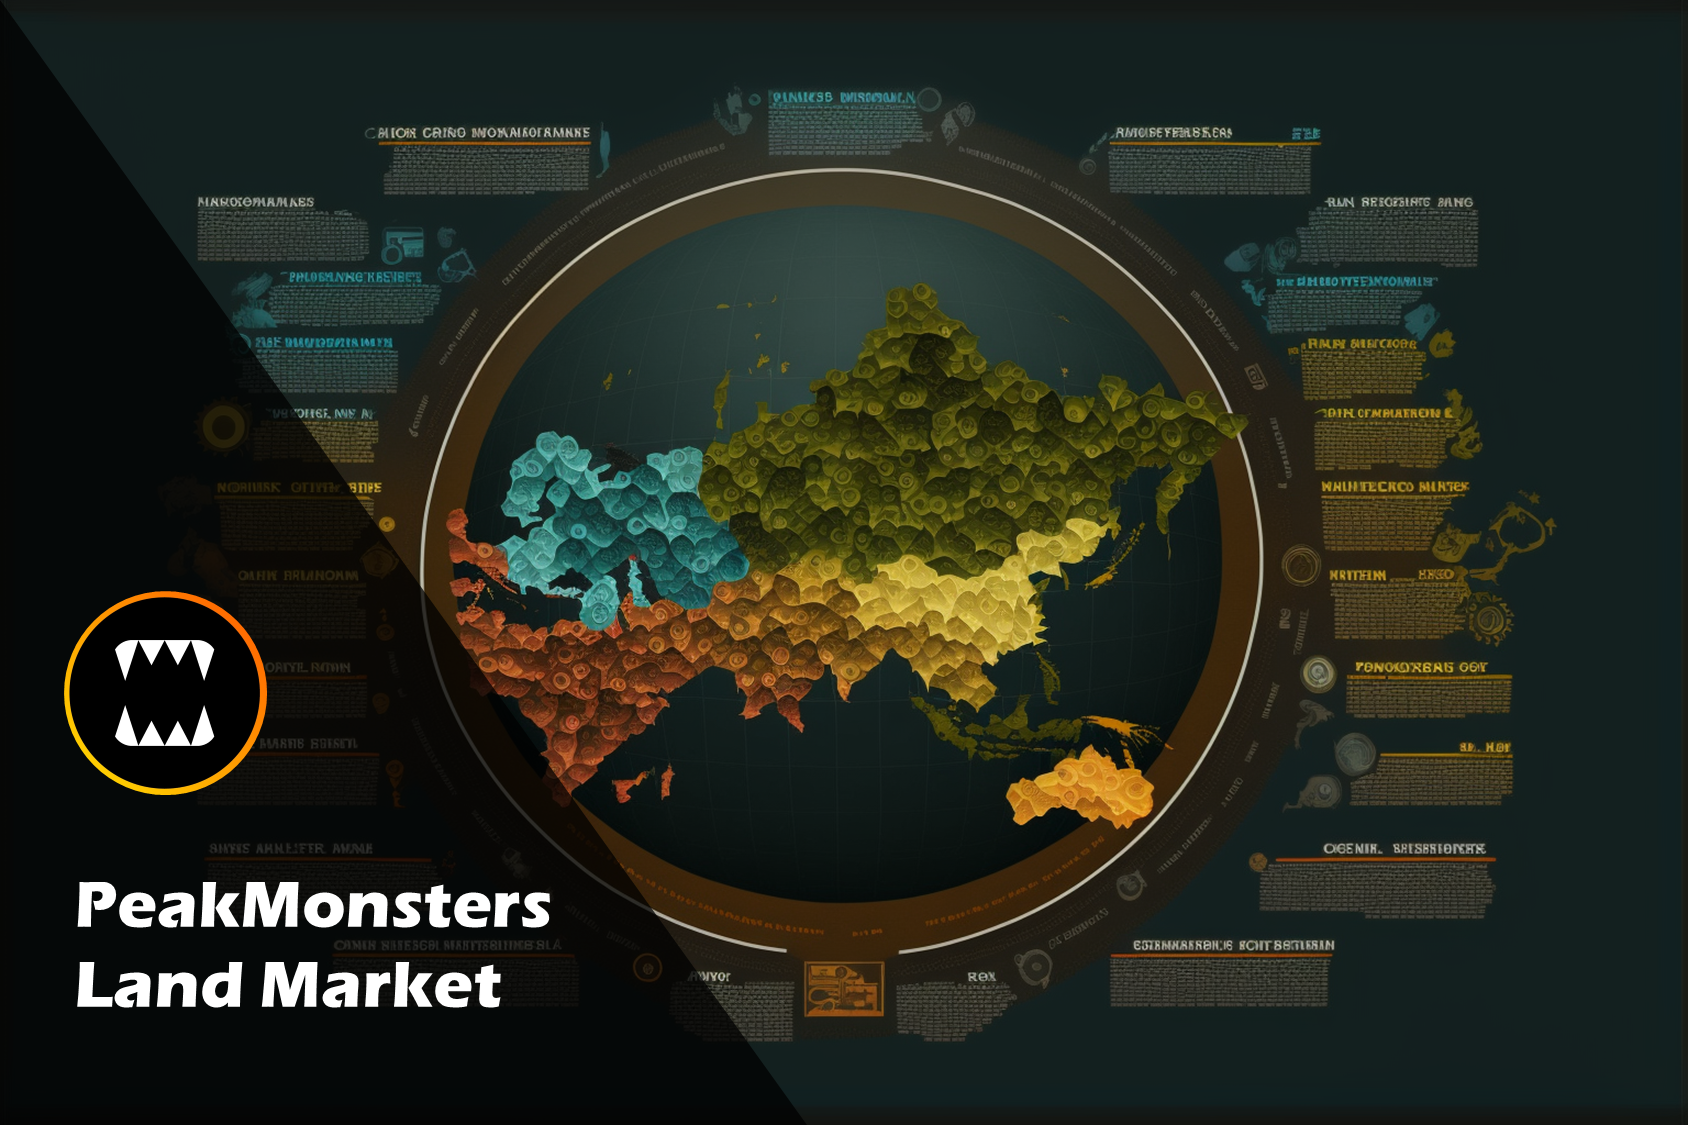 @bravetofu/peakmonsters-land-market-is-awesome-quick-review